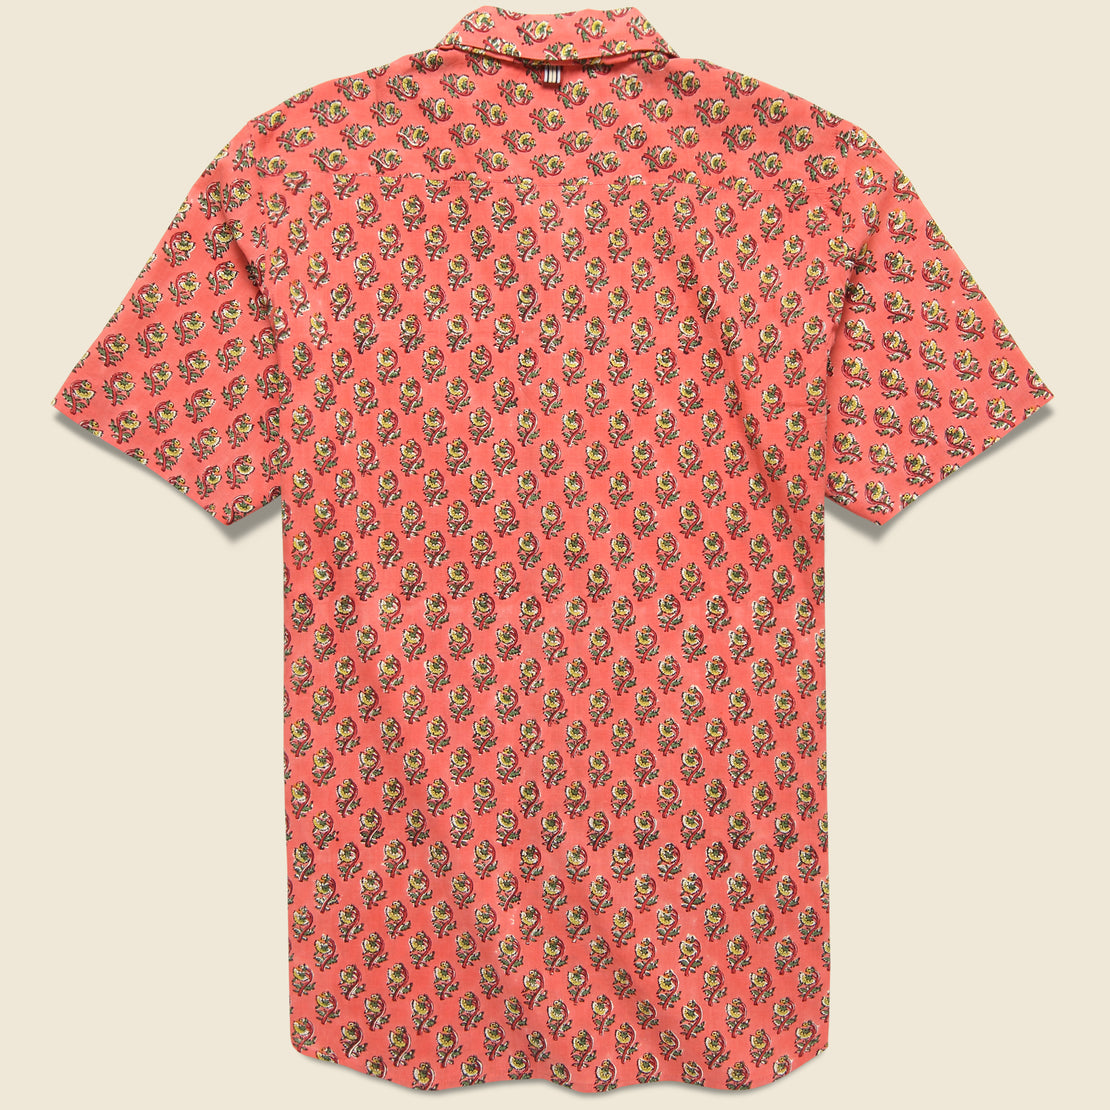 Lamar Block Print Floral Shirt - Pink - Kardo - STAG Provisions - Tops - S/S Woven - Floral